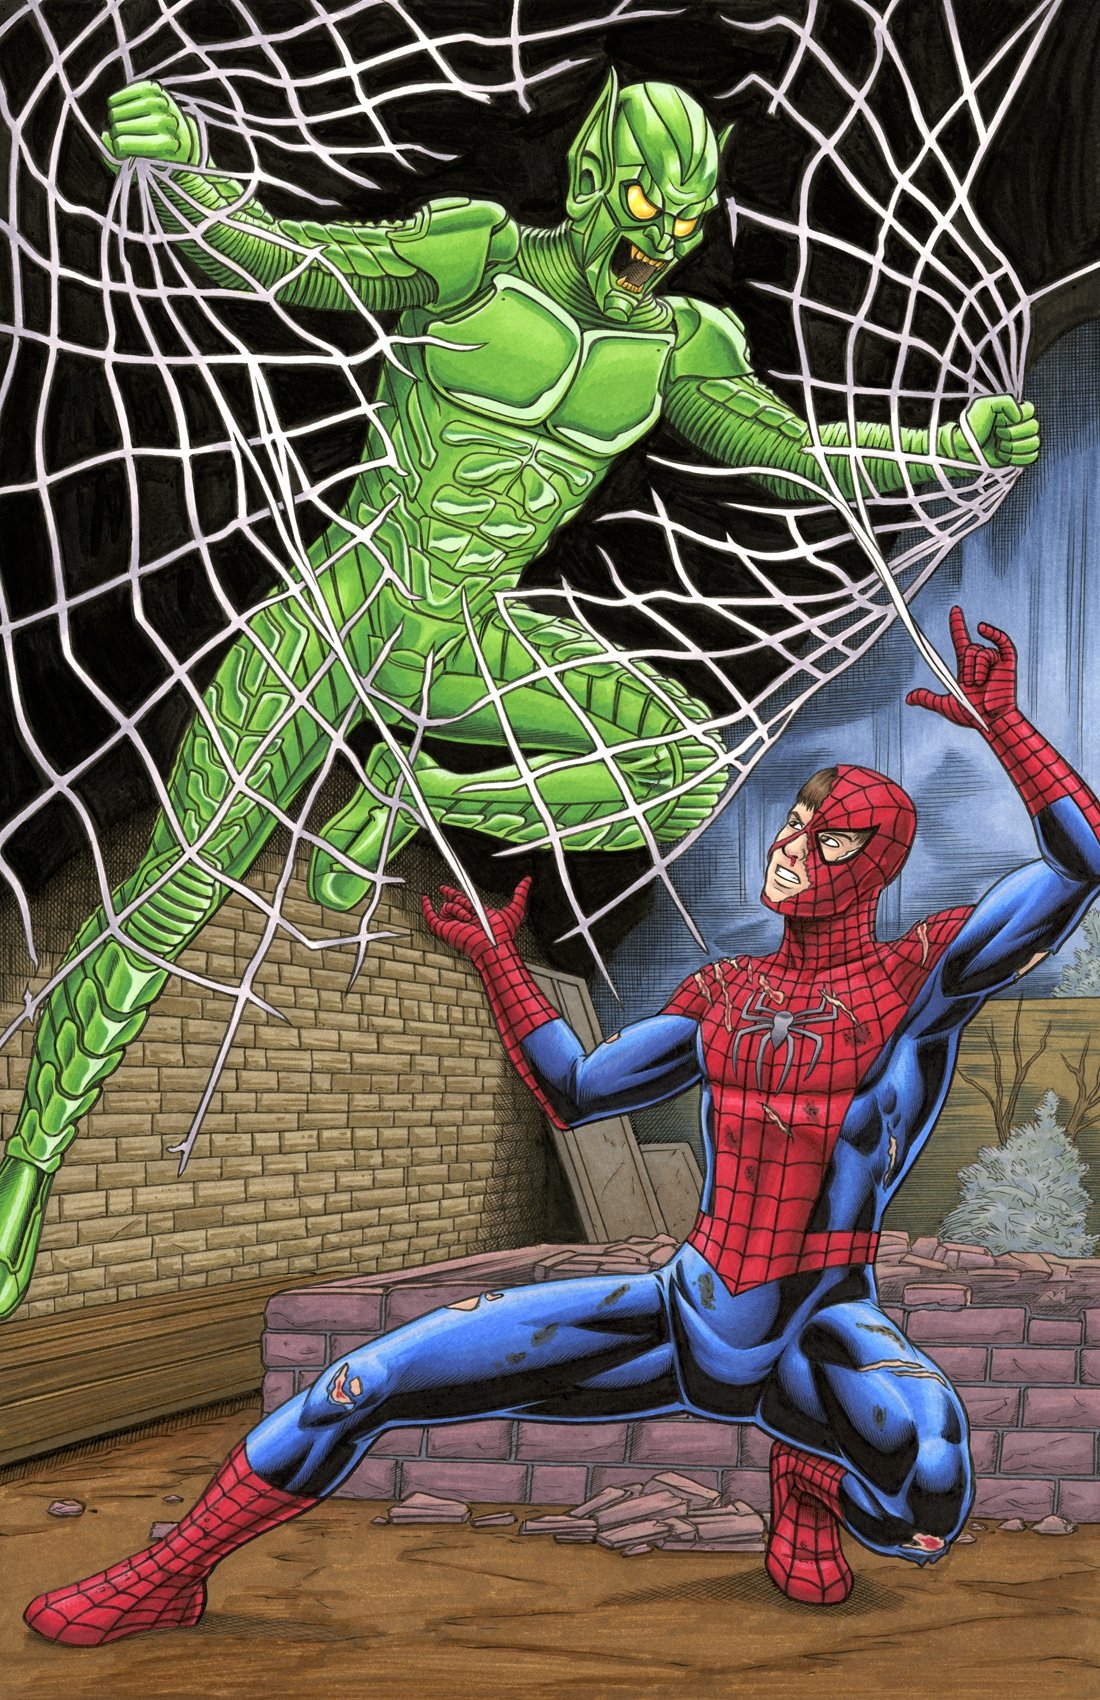 SPIDER-MAN vs. THE GREEN GOBLIN (Movie Version)!, in Brendon and Brian  Fraim's Commissions - 2021 Comic Art Gallery Room